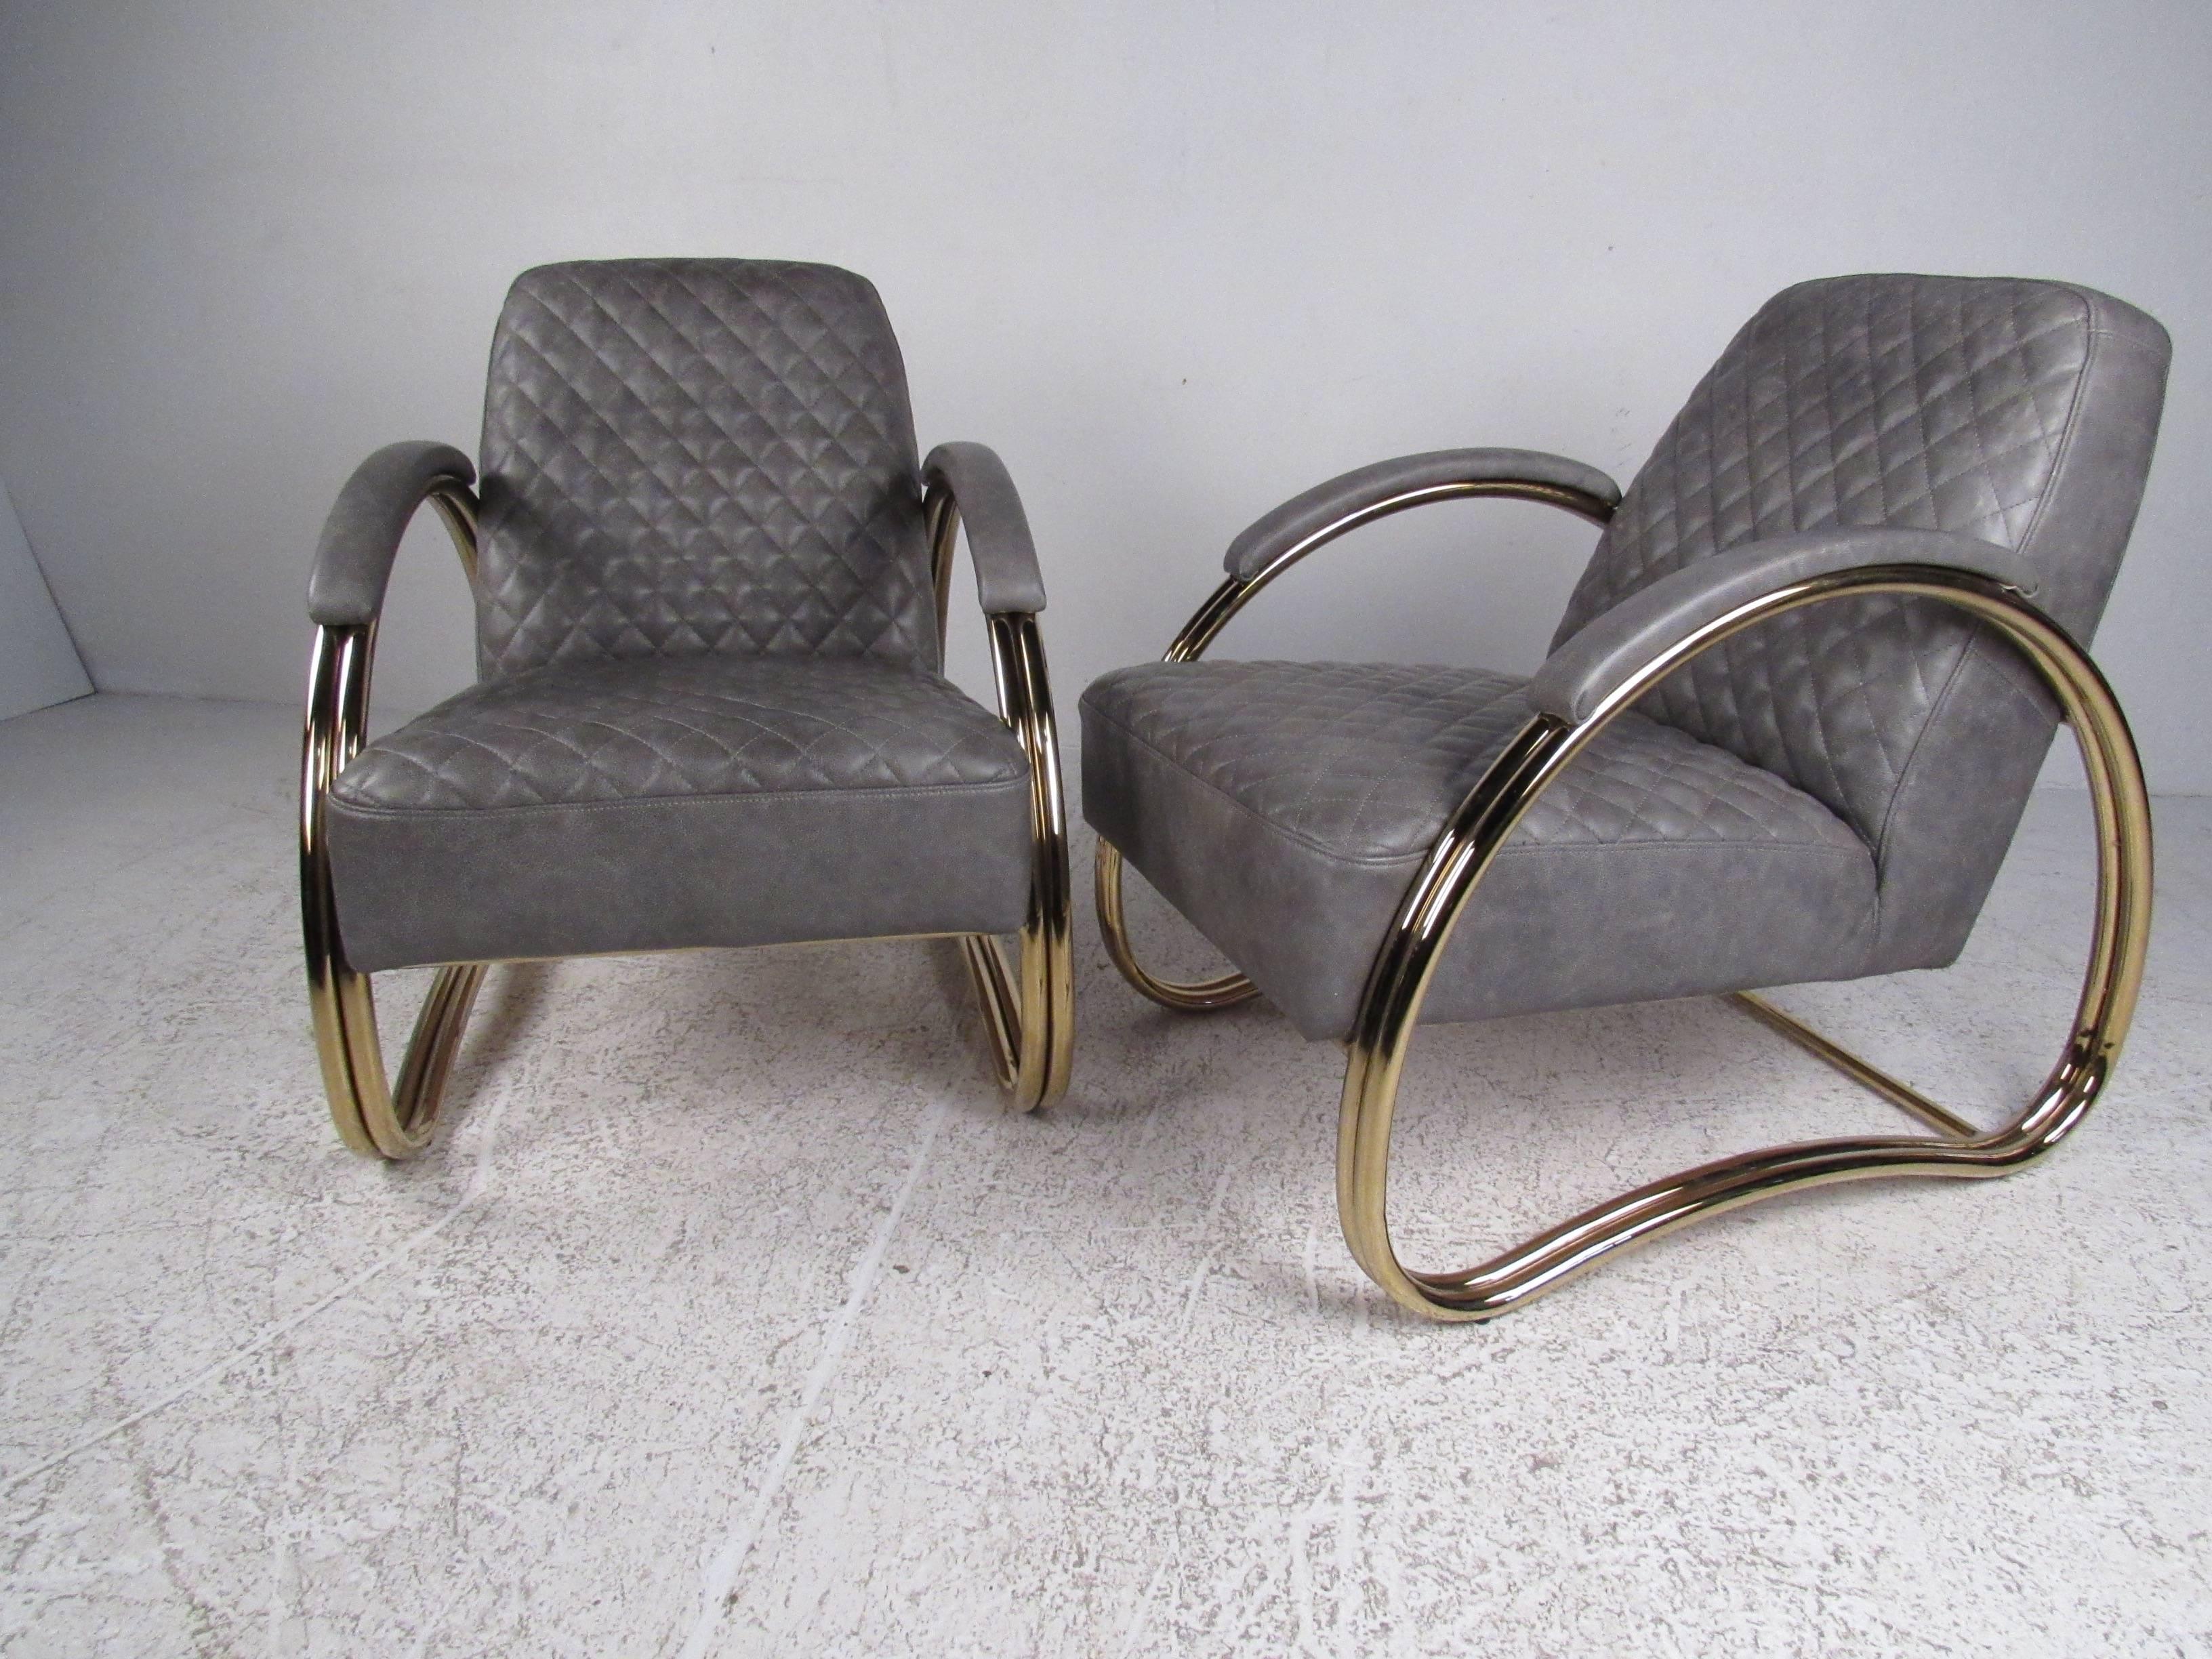 This stylish pair of contemporary modern lounge chairs feature stitched leather upholstery, unique brass finish sculpted frames, and comfortable seating proportions. Elegant midcentury style makes a unique addition to home or business seating areas.